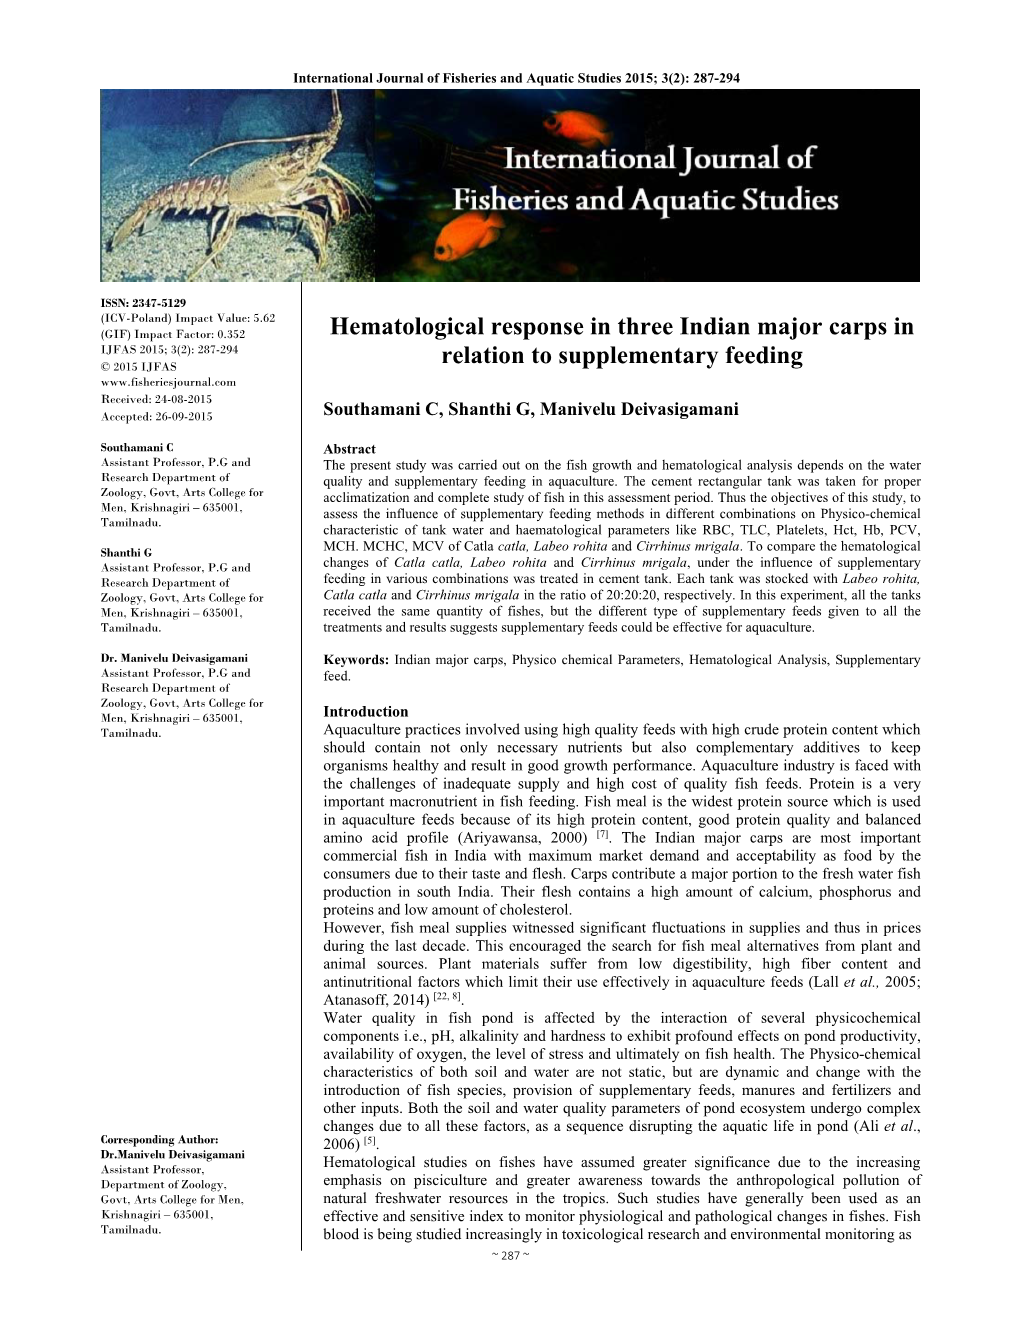 Hematological Response in Three Indian Major Carps in Relation To